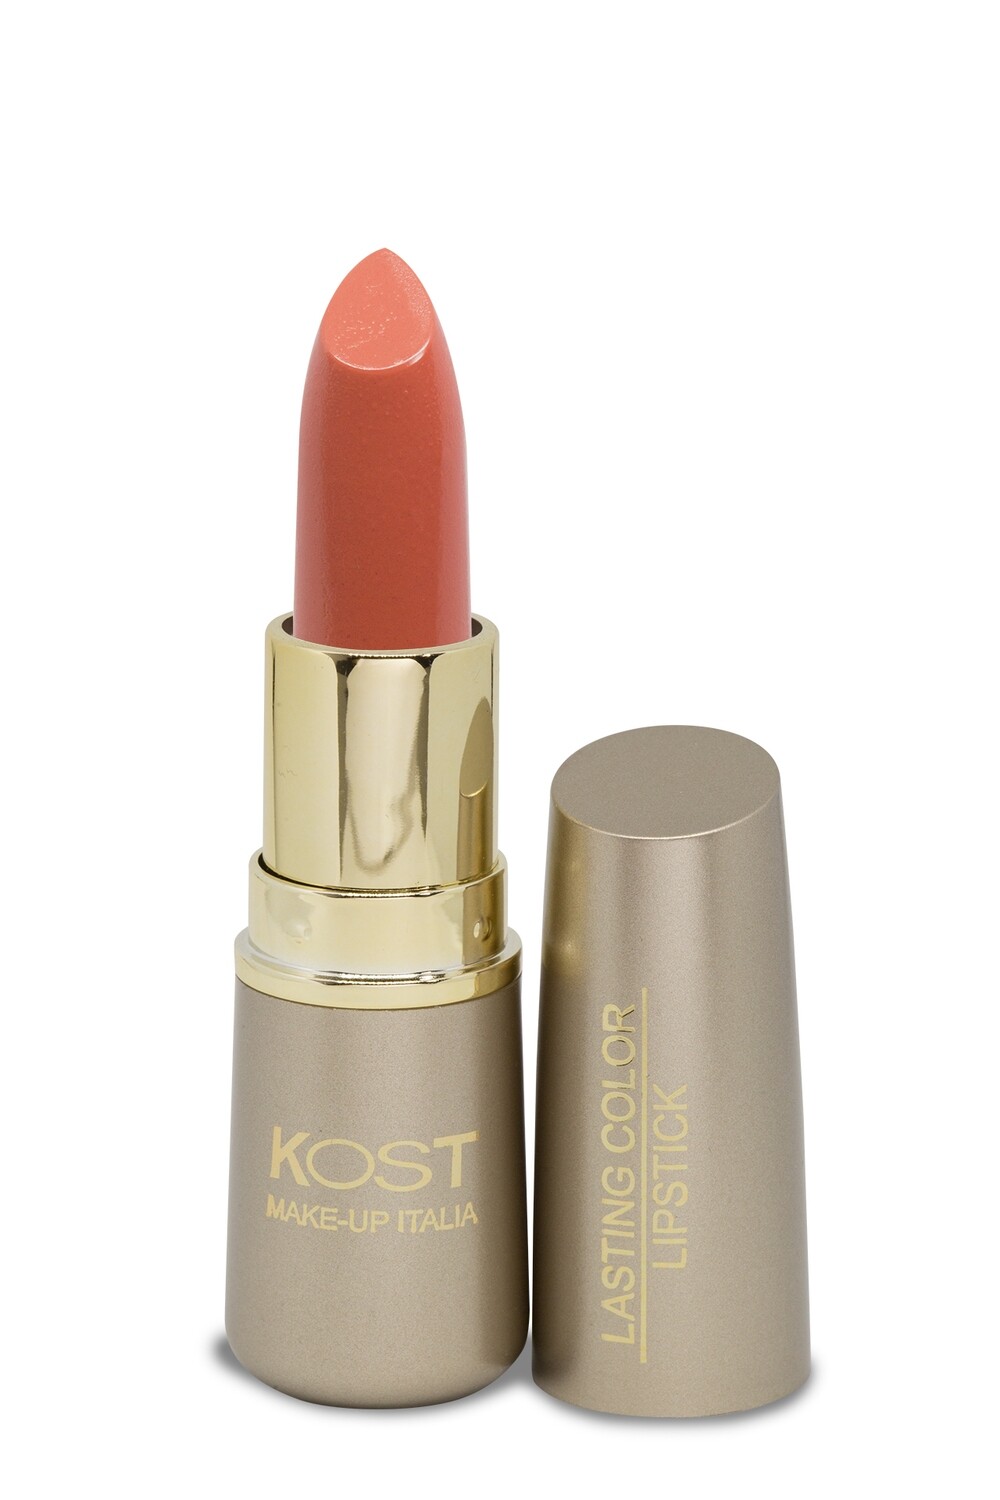 Kost Rossetto lasting color N1